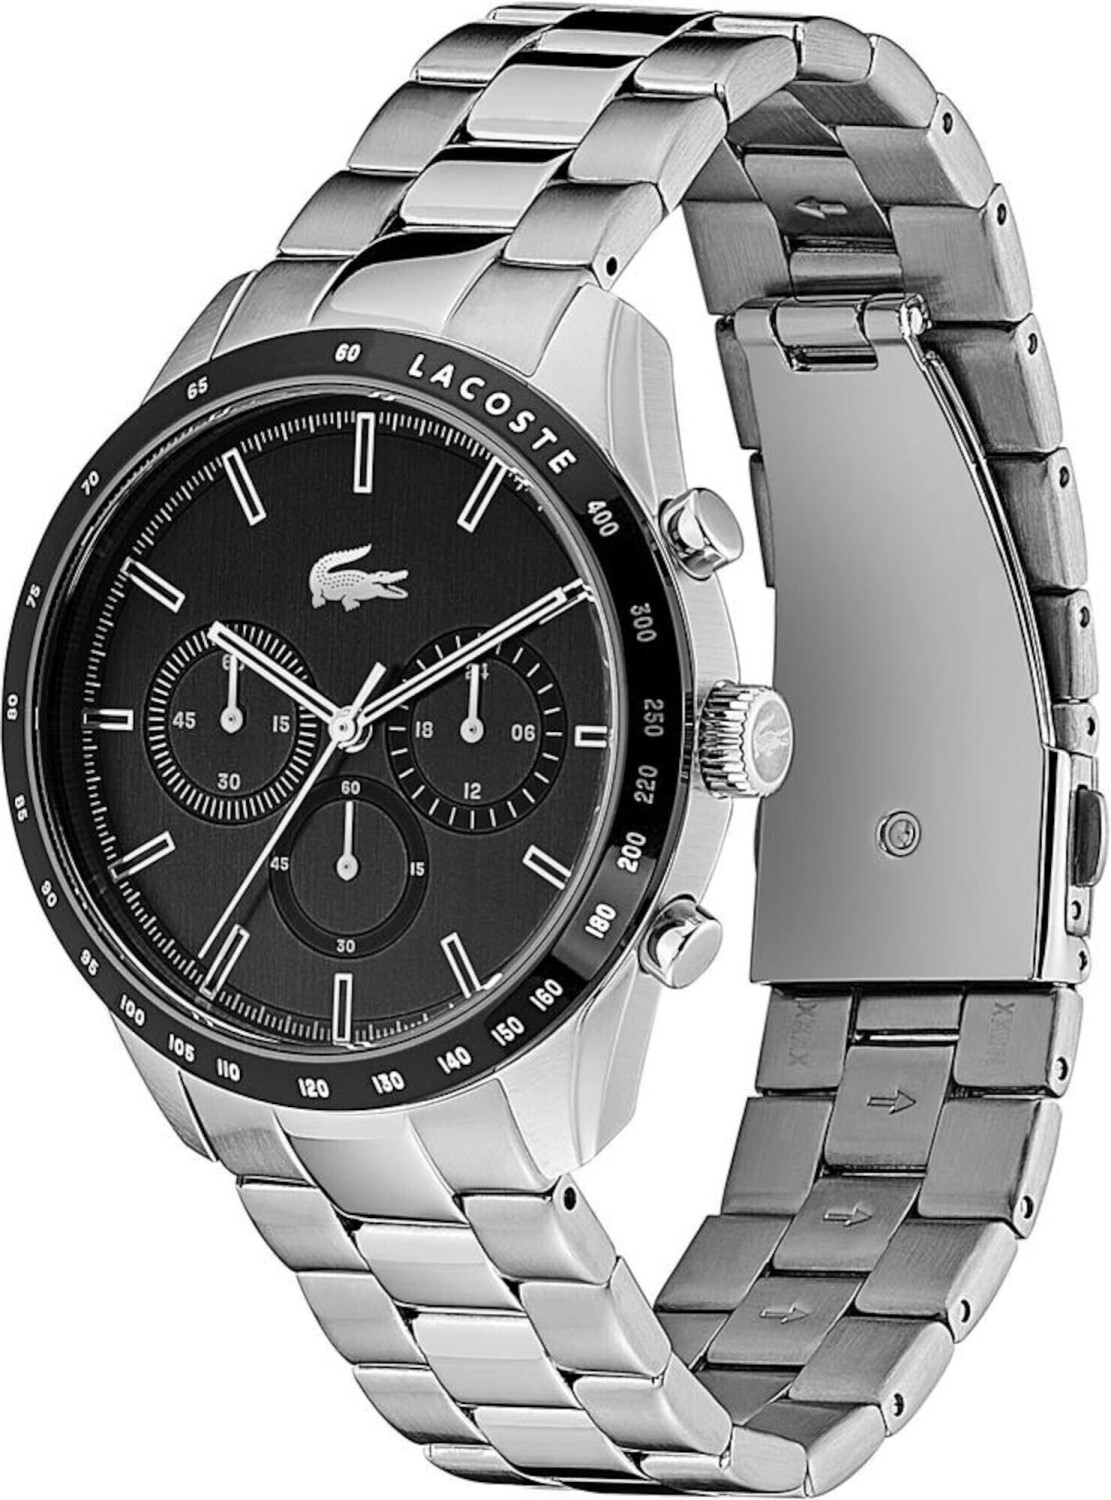 (Today) Boston £122.42 Deals Buy Lacoste Best from Chronograph on –